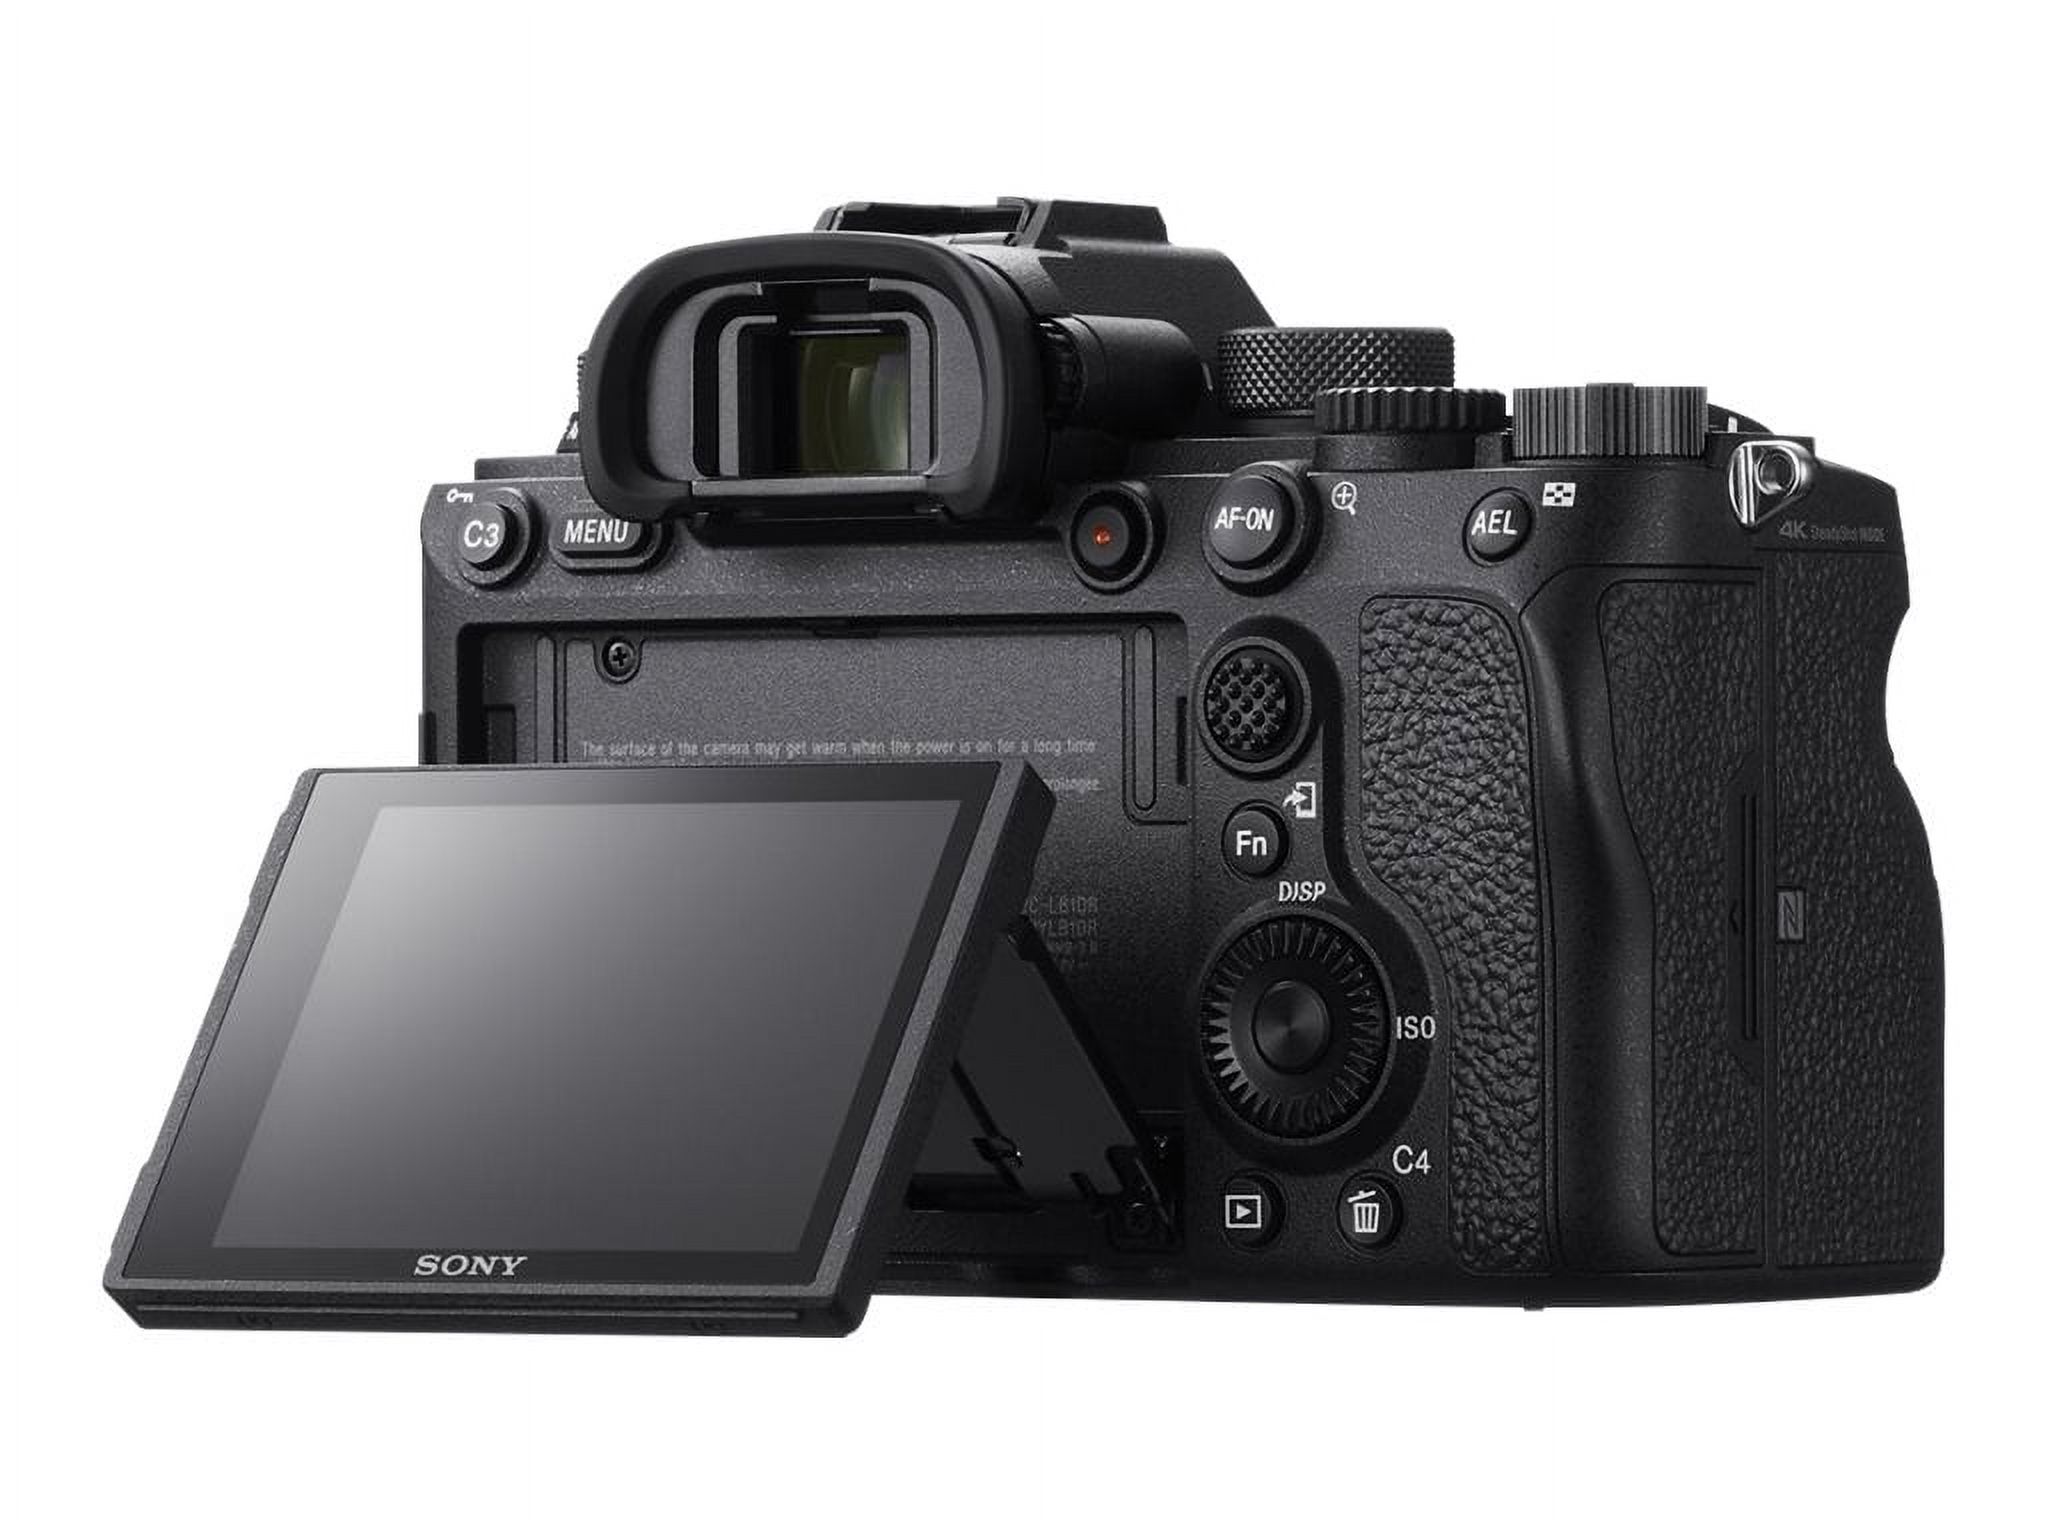 Sony a9 II ILCE-9M2 - Digital camera - mirrorless - 24.2 MP - Full Frame - 4K / 30 fps - body only - NFC, Wi-Fi, Bluetooth - black - image 3 of 14